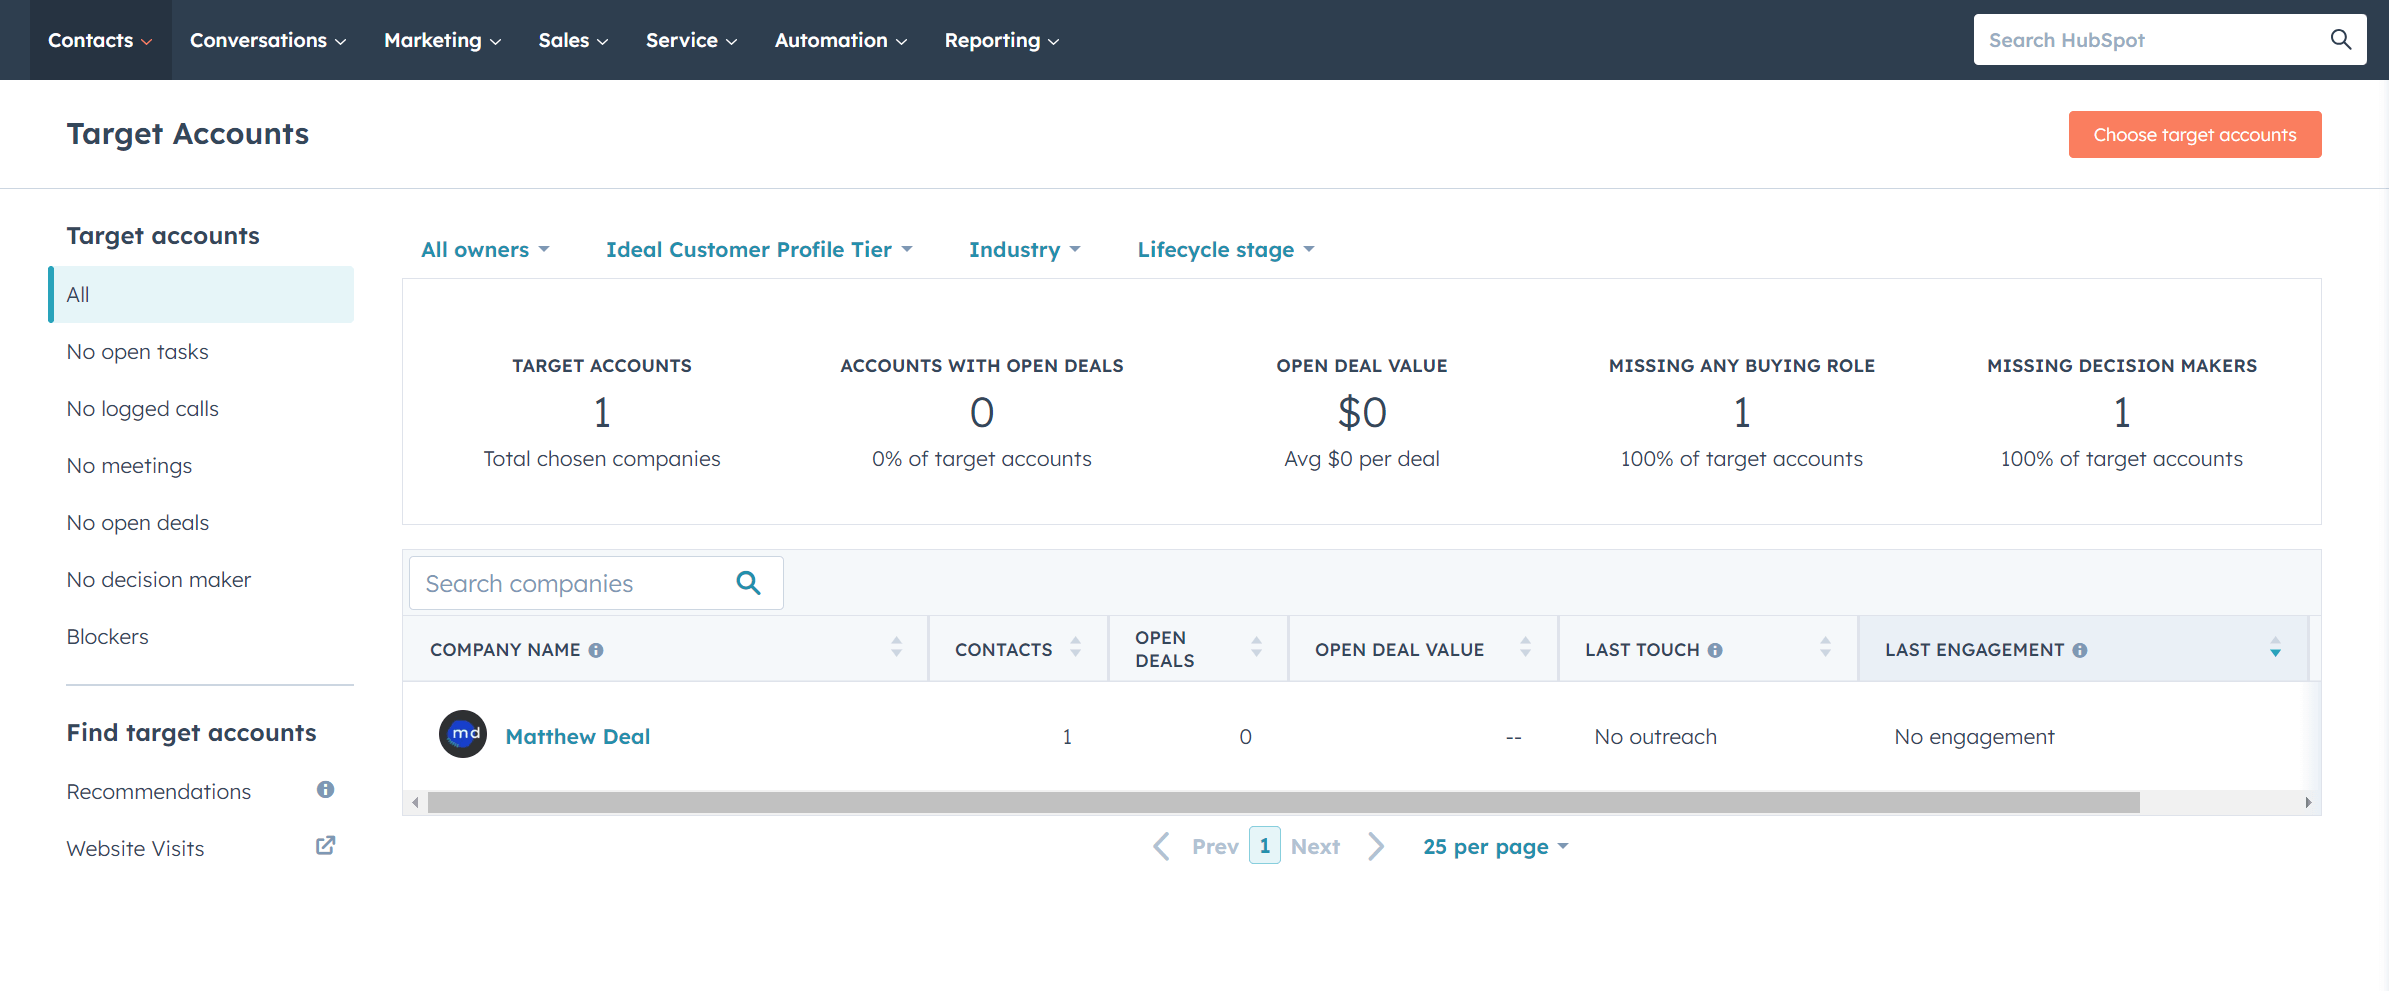 HubSpot's ABM Target Accounts Index Screen showing a dashboard with filters and metrics for managing and evaluating high-value accounts in a sales strategy.